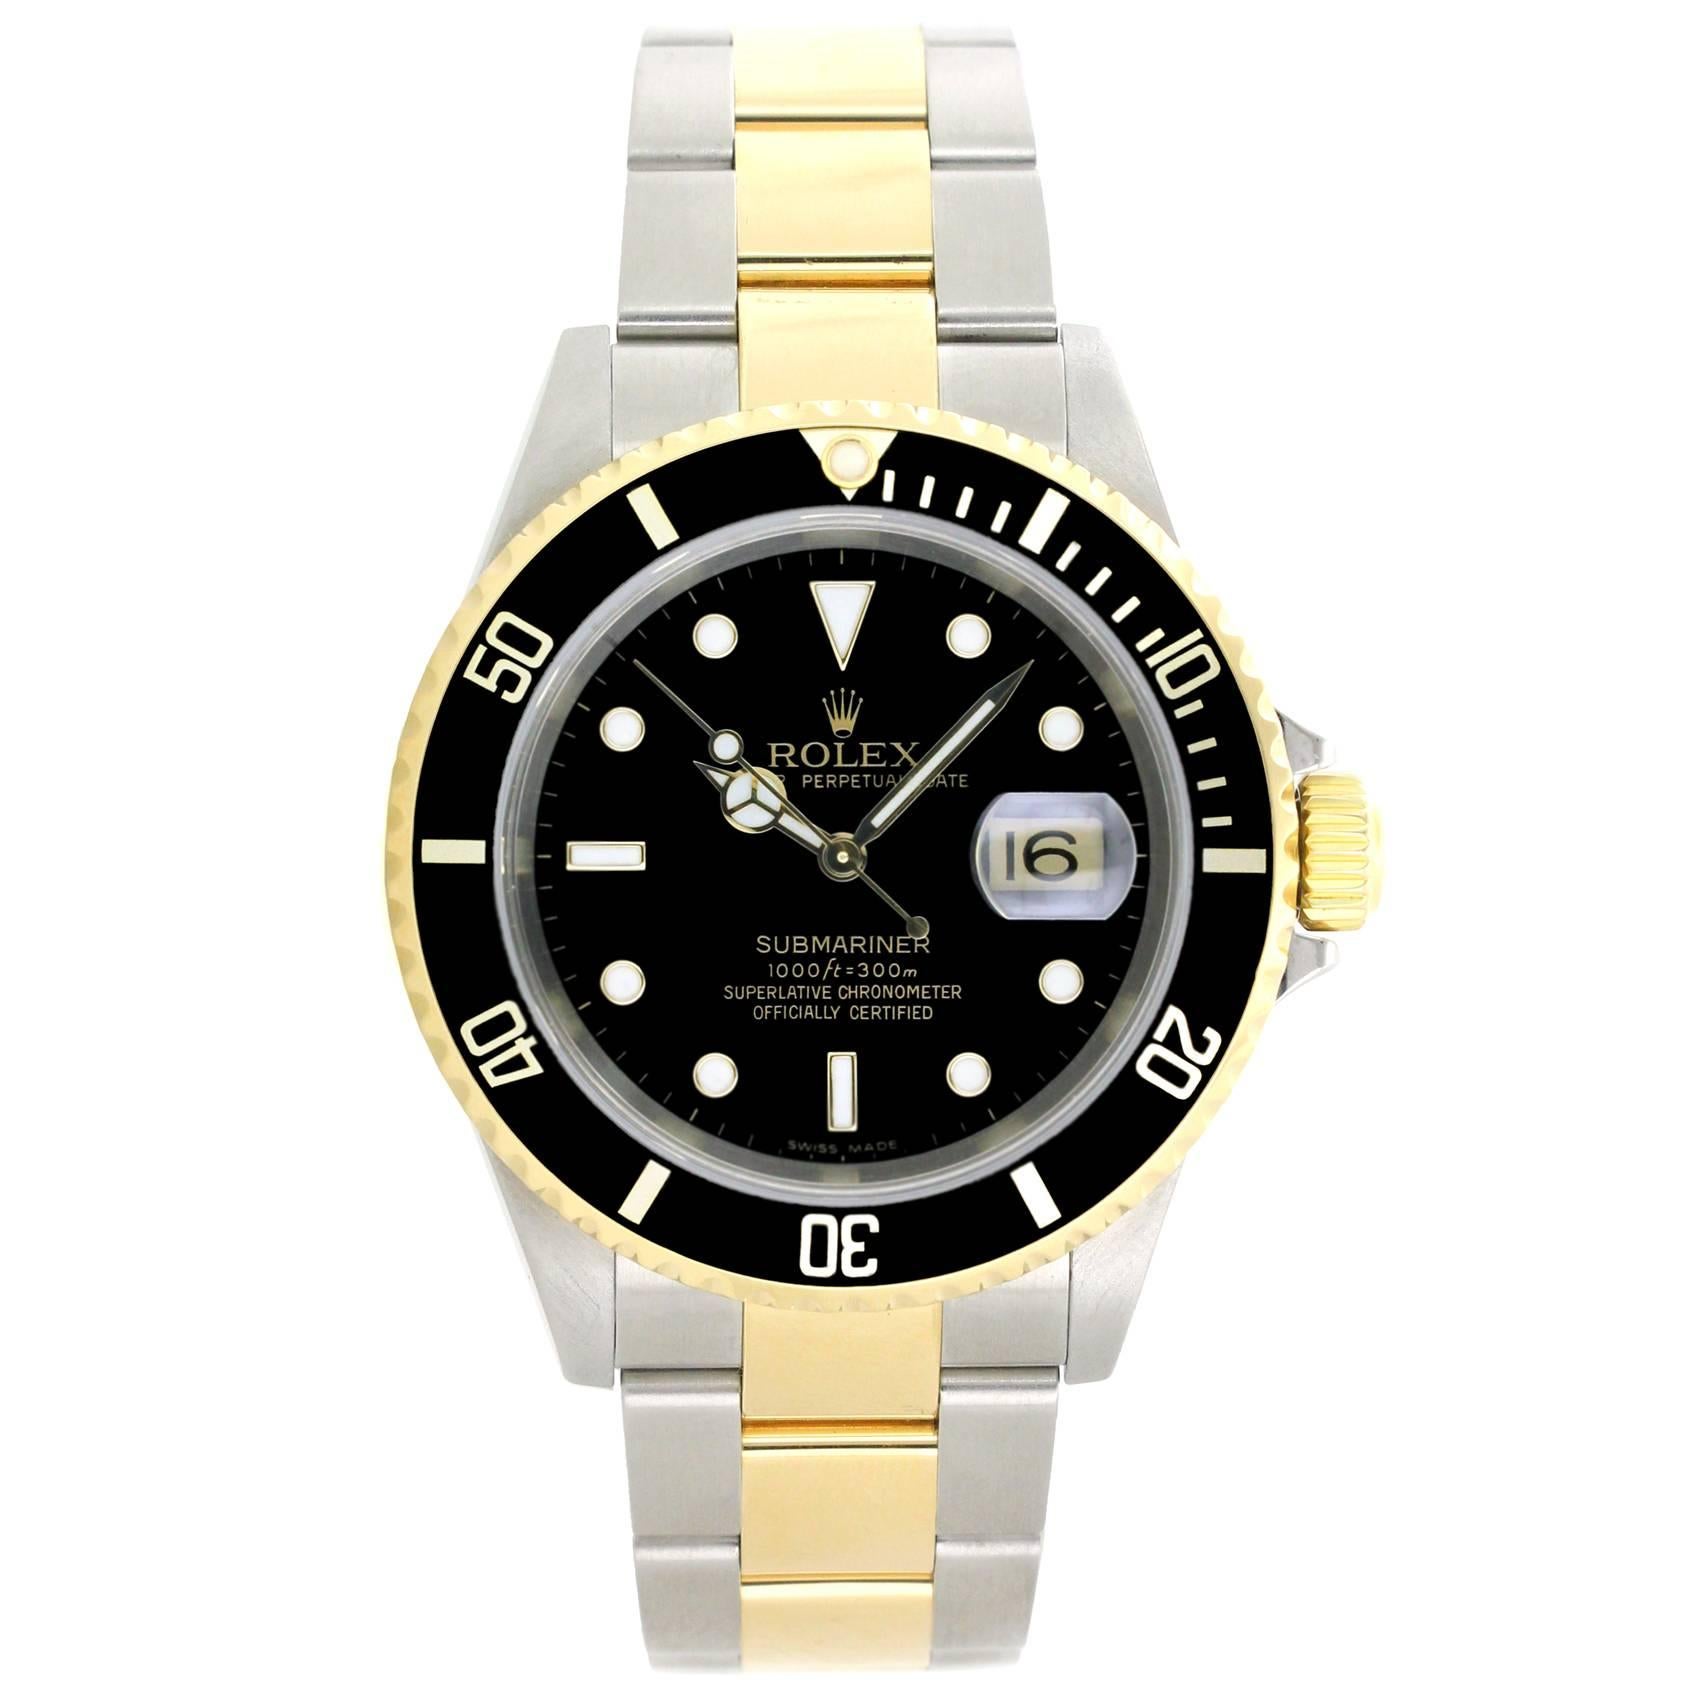 Rolex Yellow Gold Two Tone Submariner Black Dial Automatic Wristwatch Ref 116613 For Sale